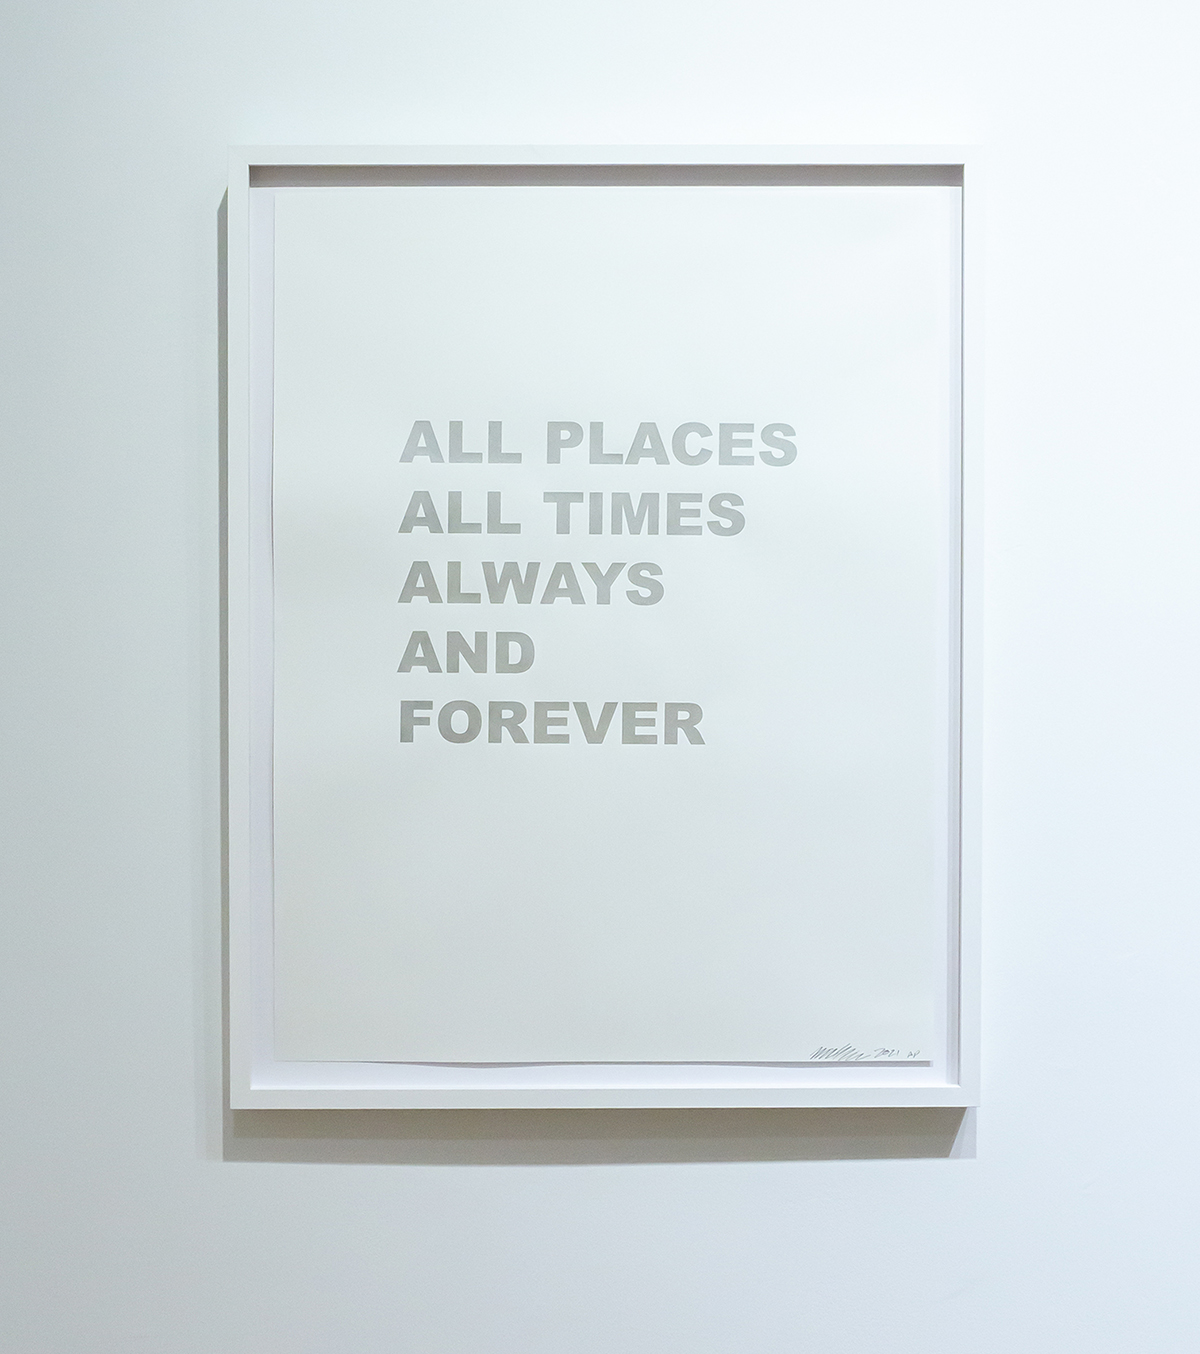 Maria Hupfield, All Places All Times